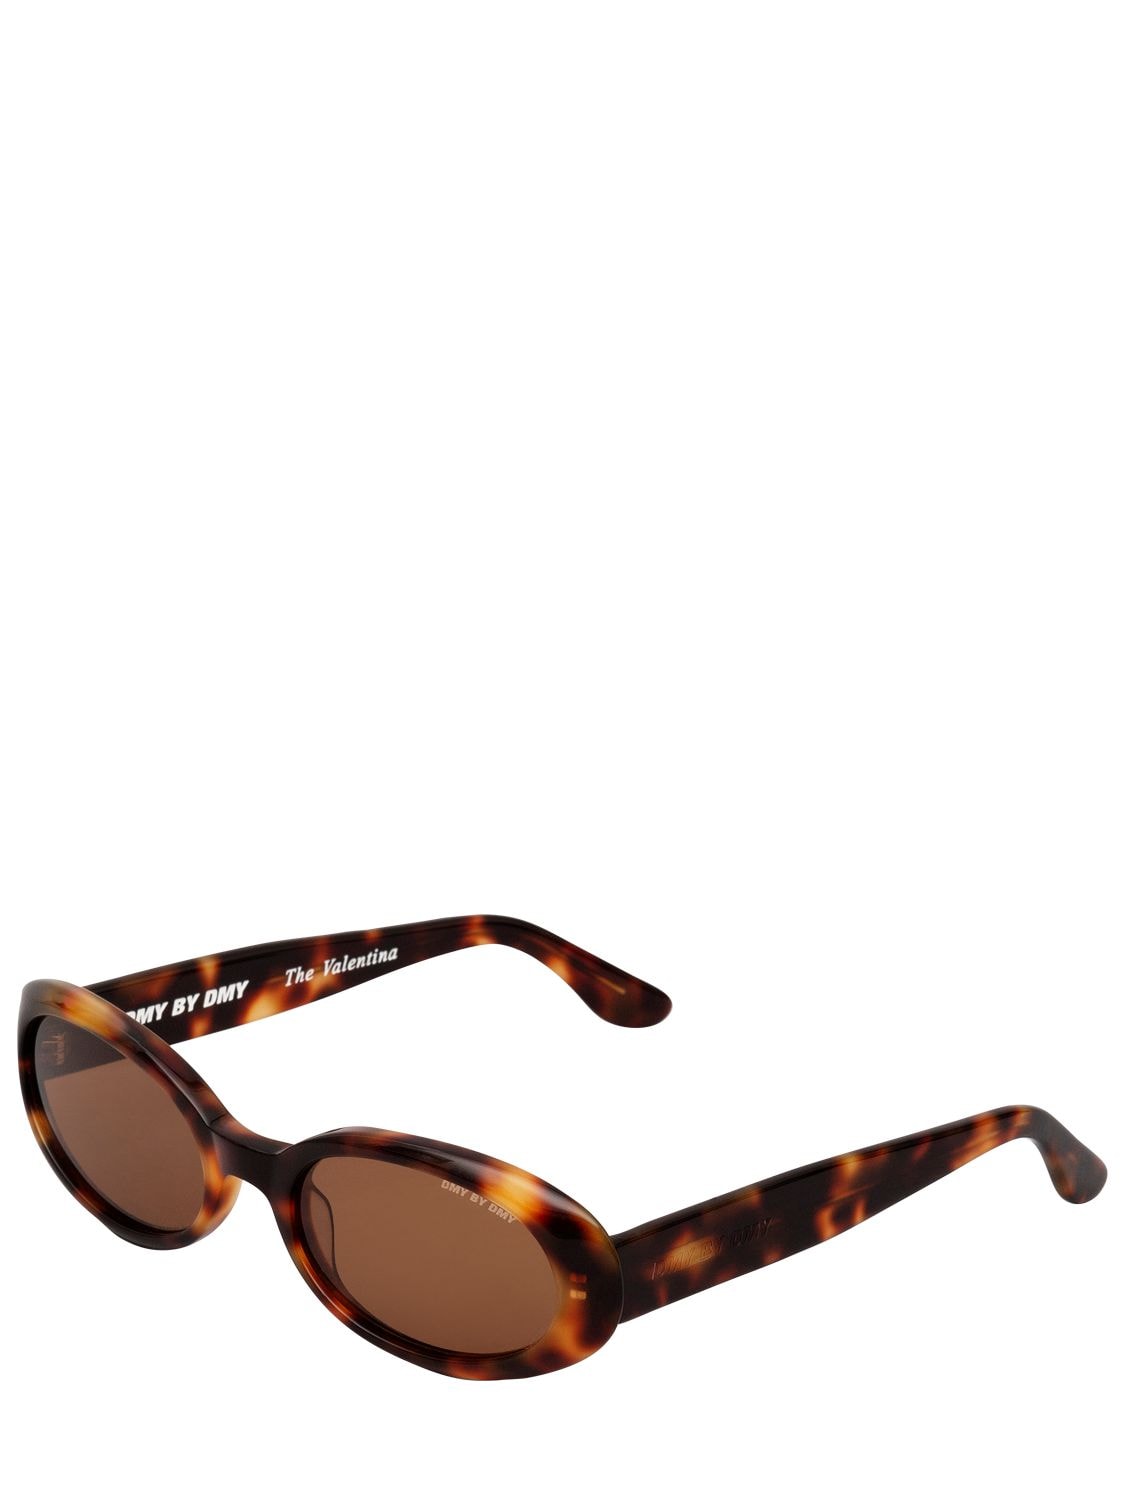 Shop Dmy By Dmy Valentina Oval Acetate Sunglasses In Havana,brown